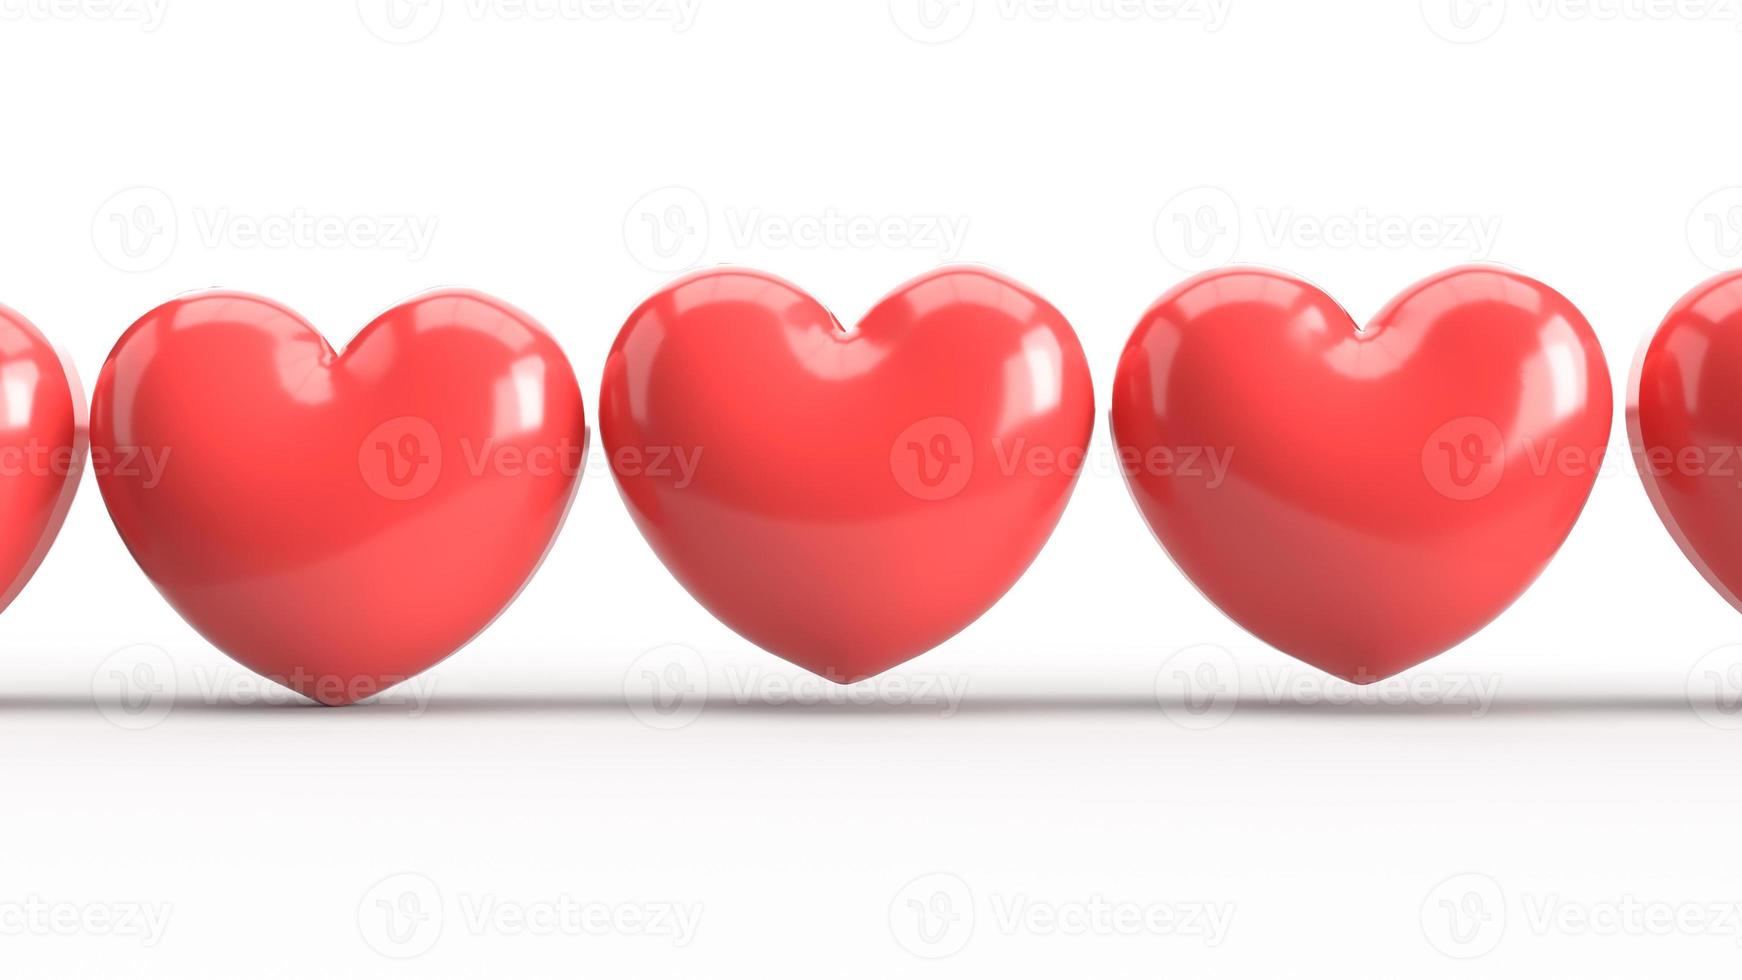 red heart 3d rendering on white for valentine content. photo